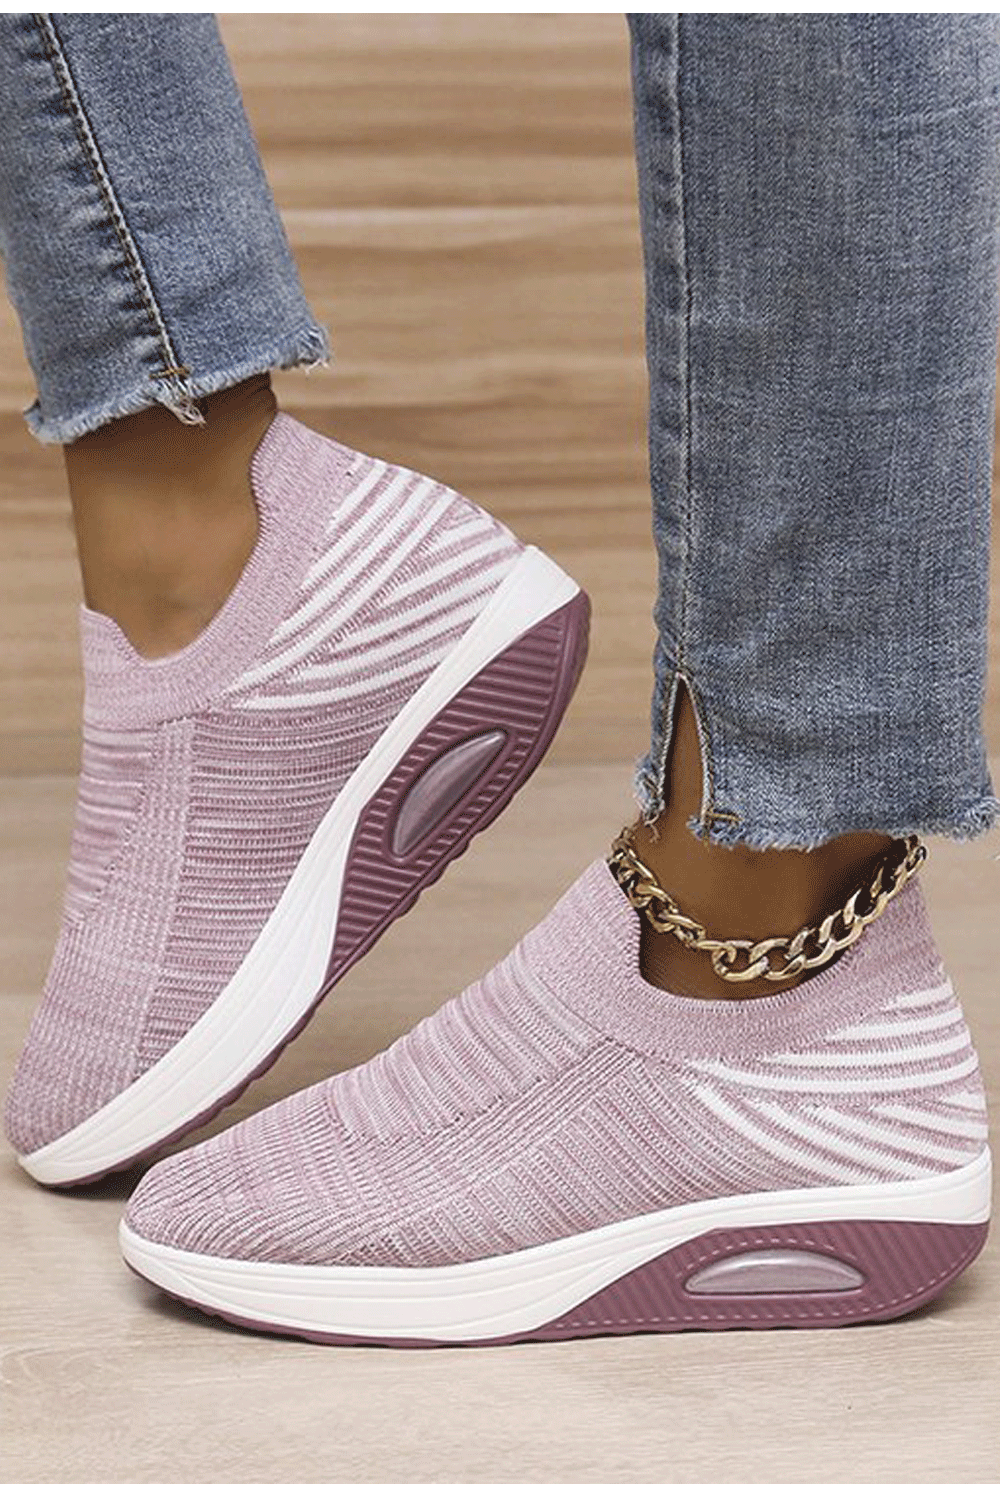 Women Thick Rubber Soled Solid Pattern Modish Autumn Season Comfy Amazing Sneaker Shoes - WSA75081